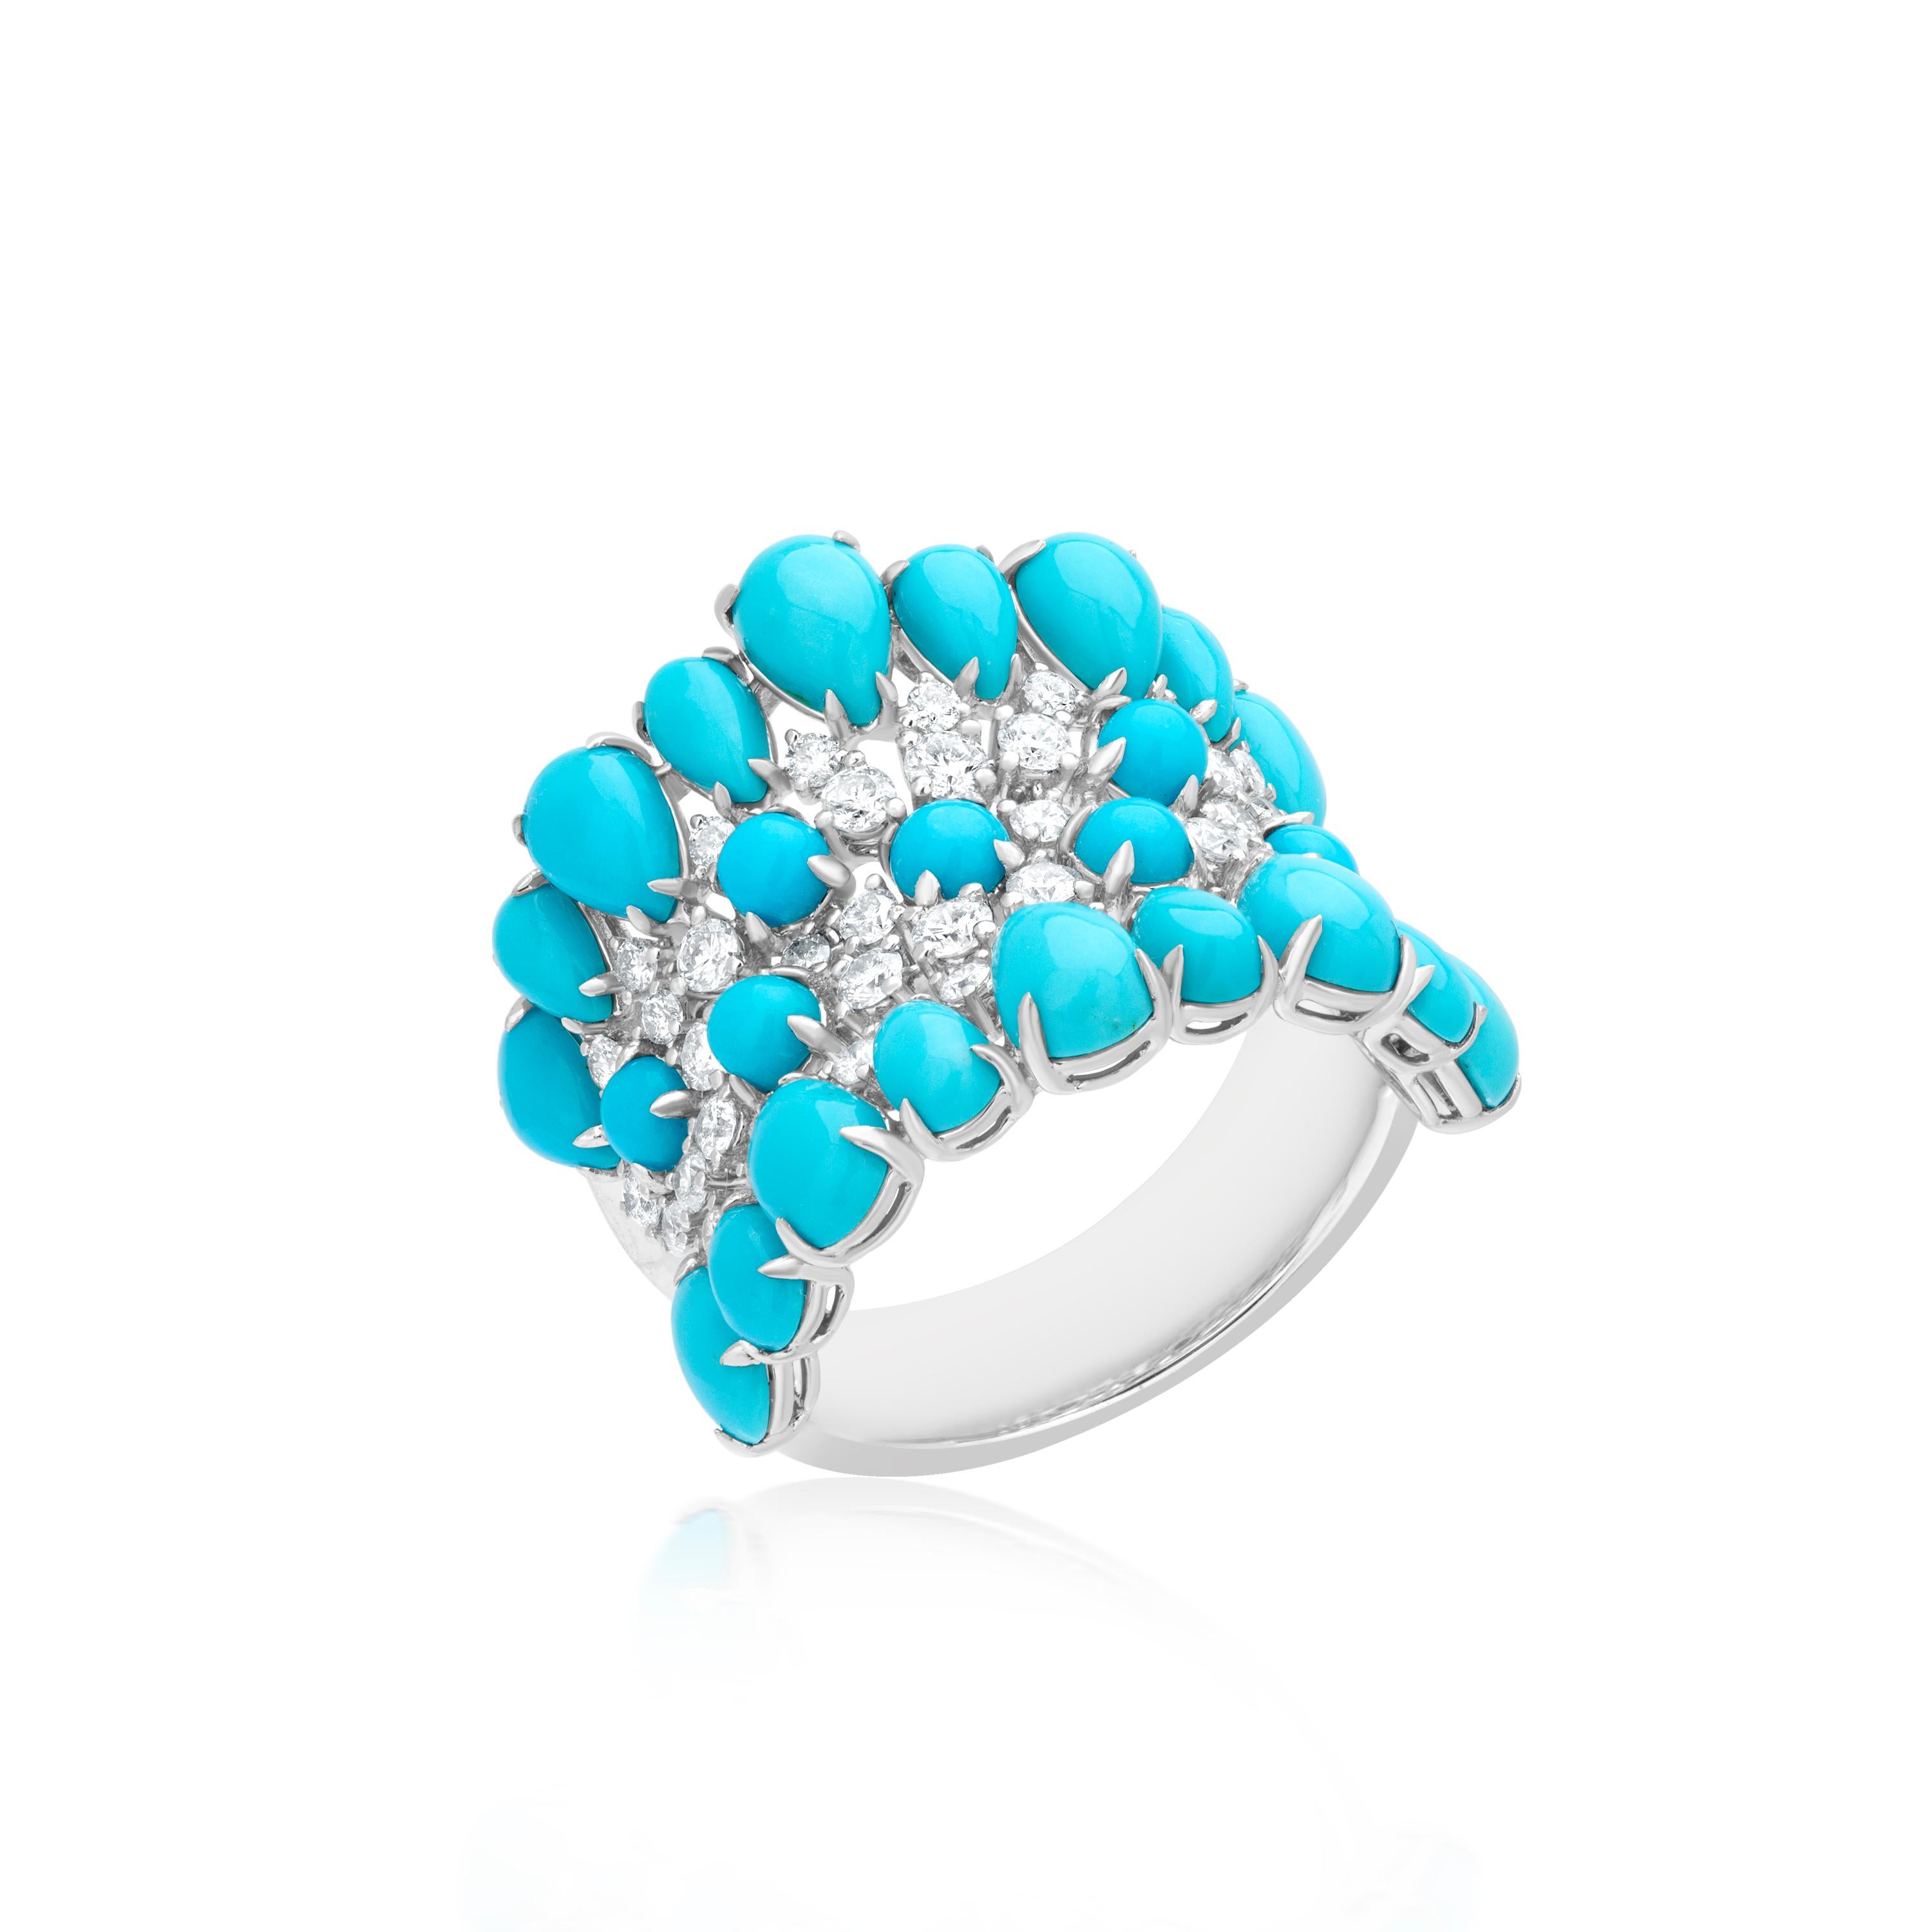 Pear Cut Gemistry 7.14cttw. Turquoise and Diamond Cluster Dome Ring in 18k White Gold